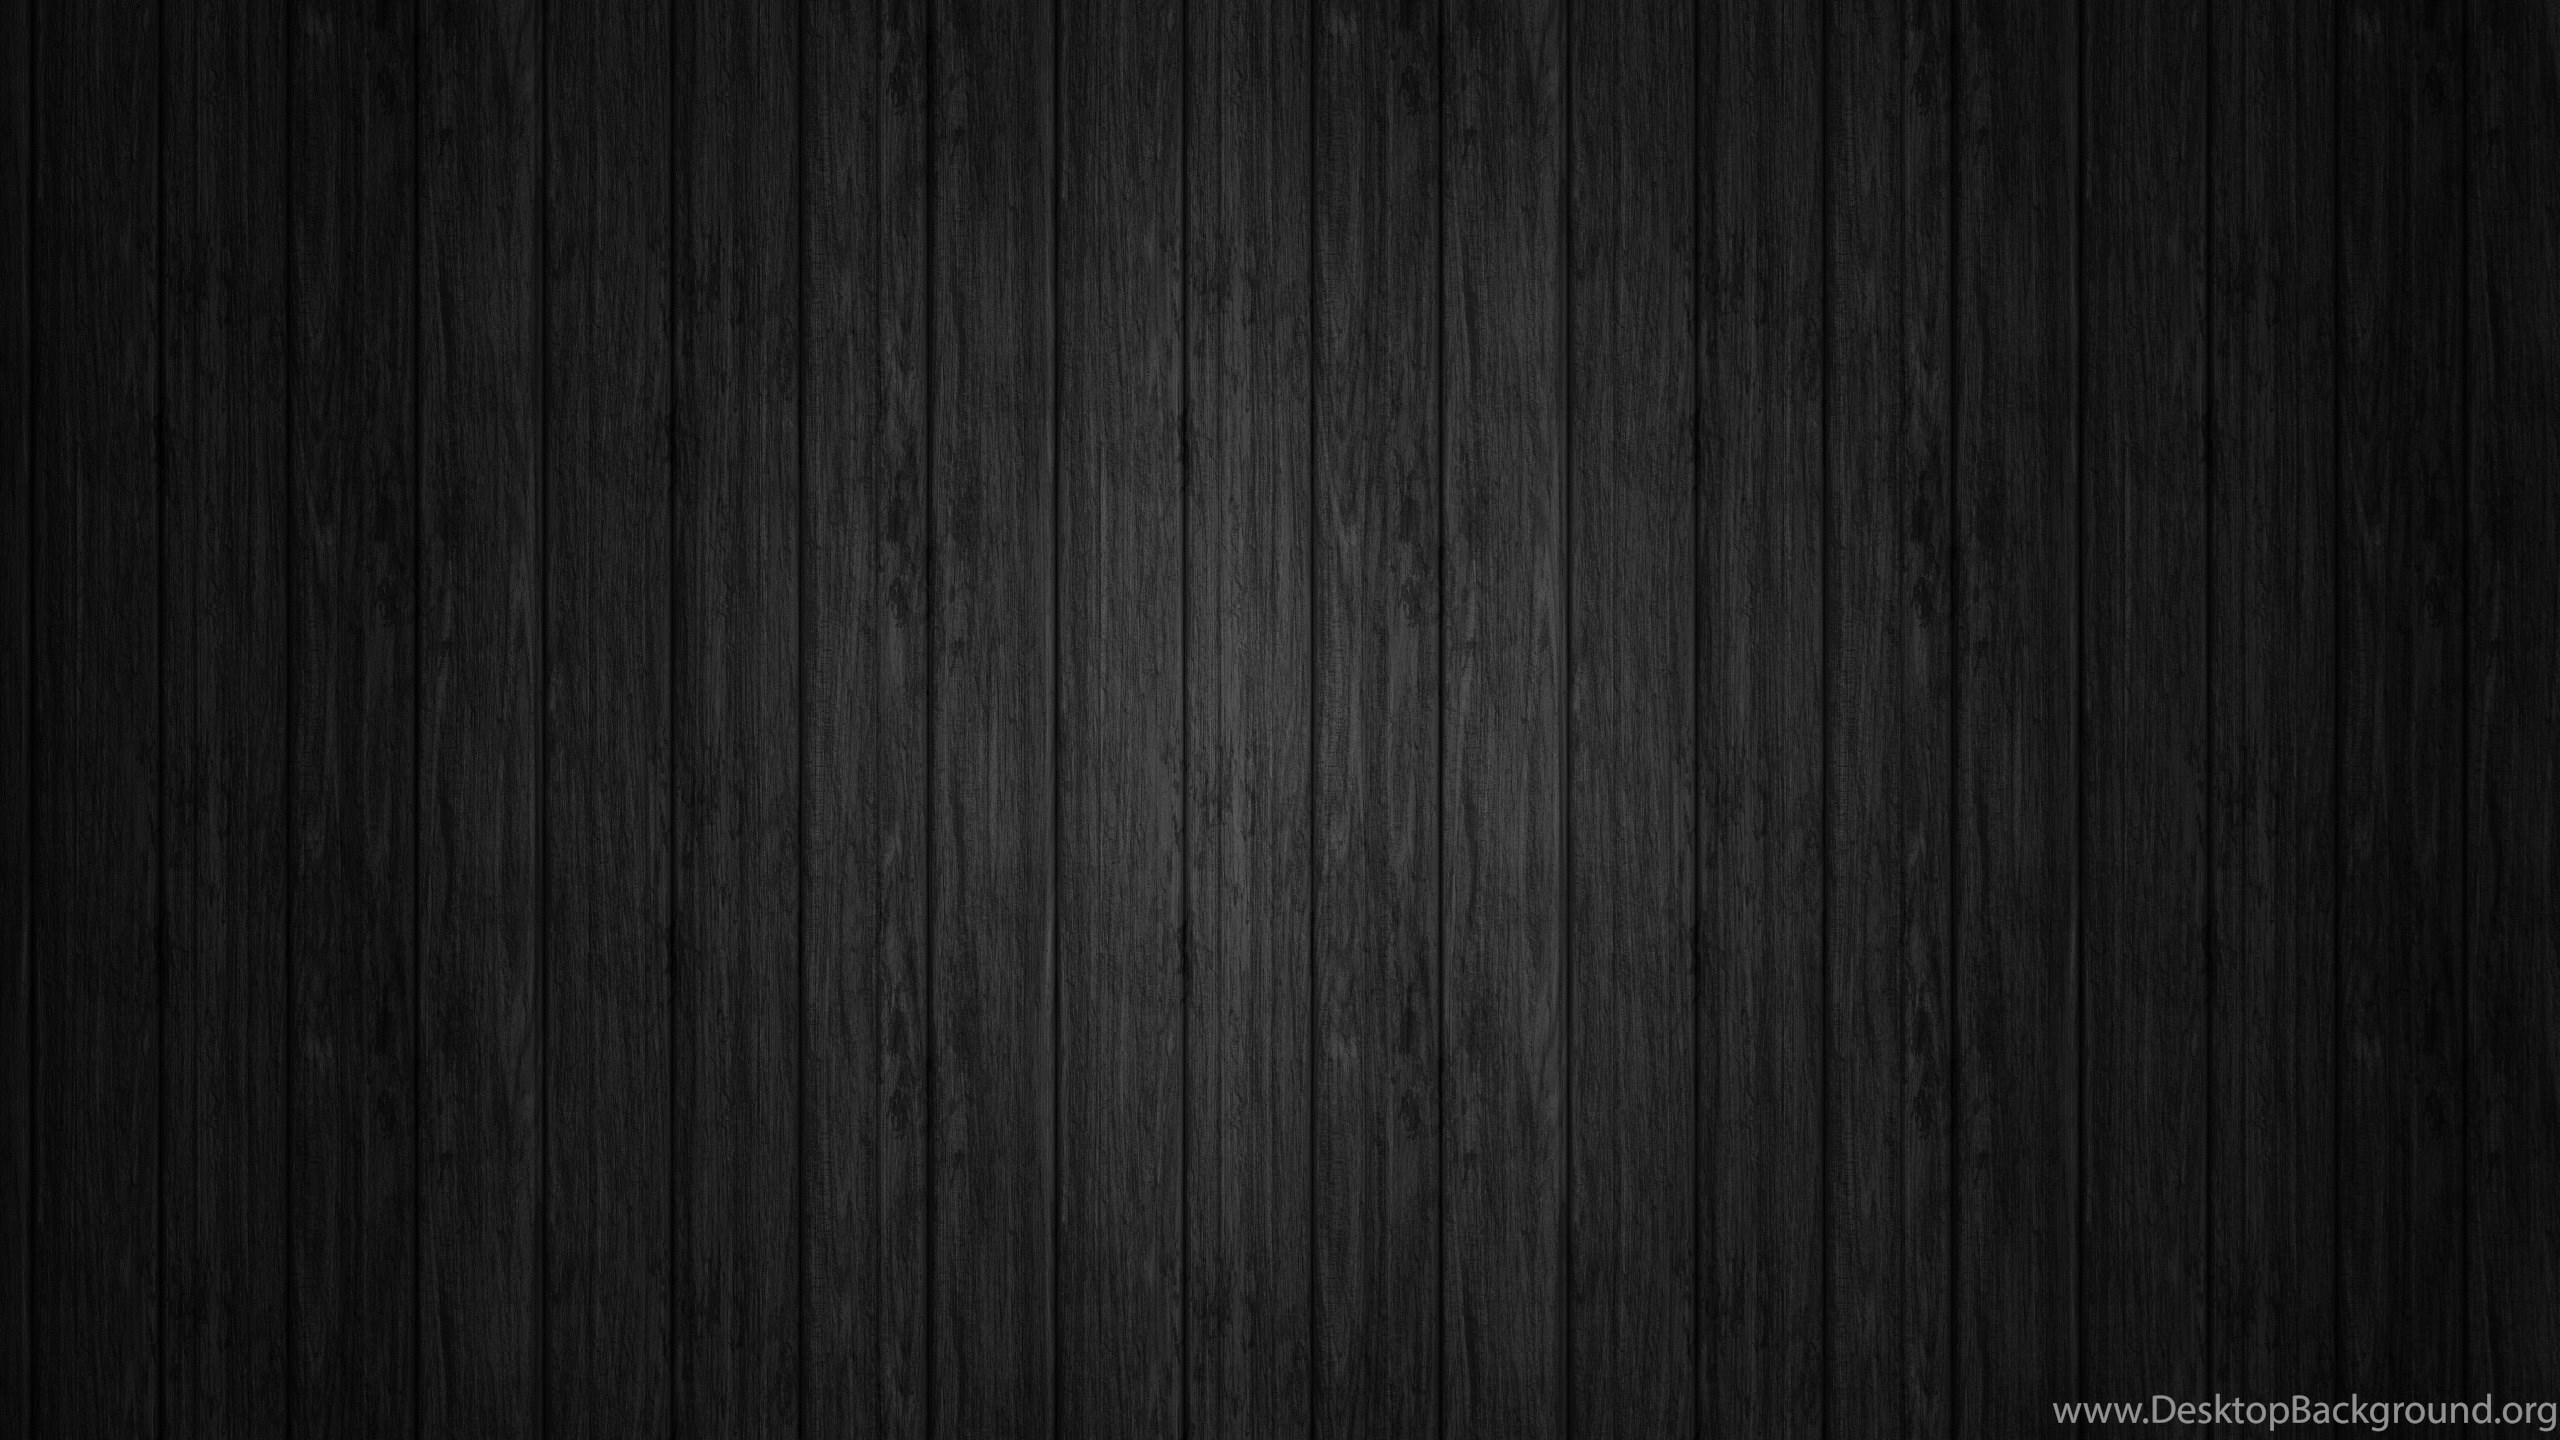 Black And White Wallpapers Tumblr Hd Images New Desktop Background,Bedroom Furniture Phoenix Az